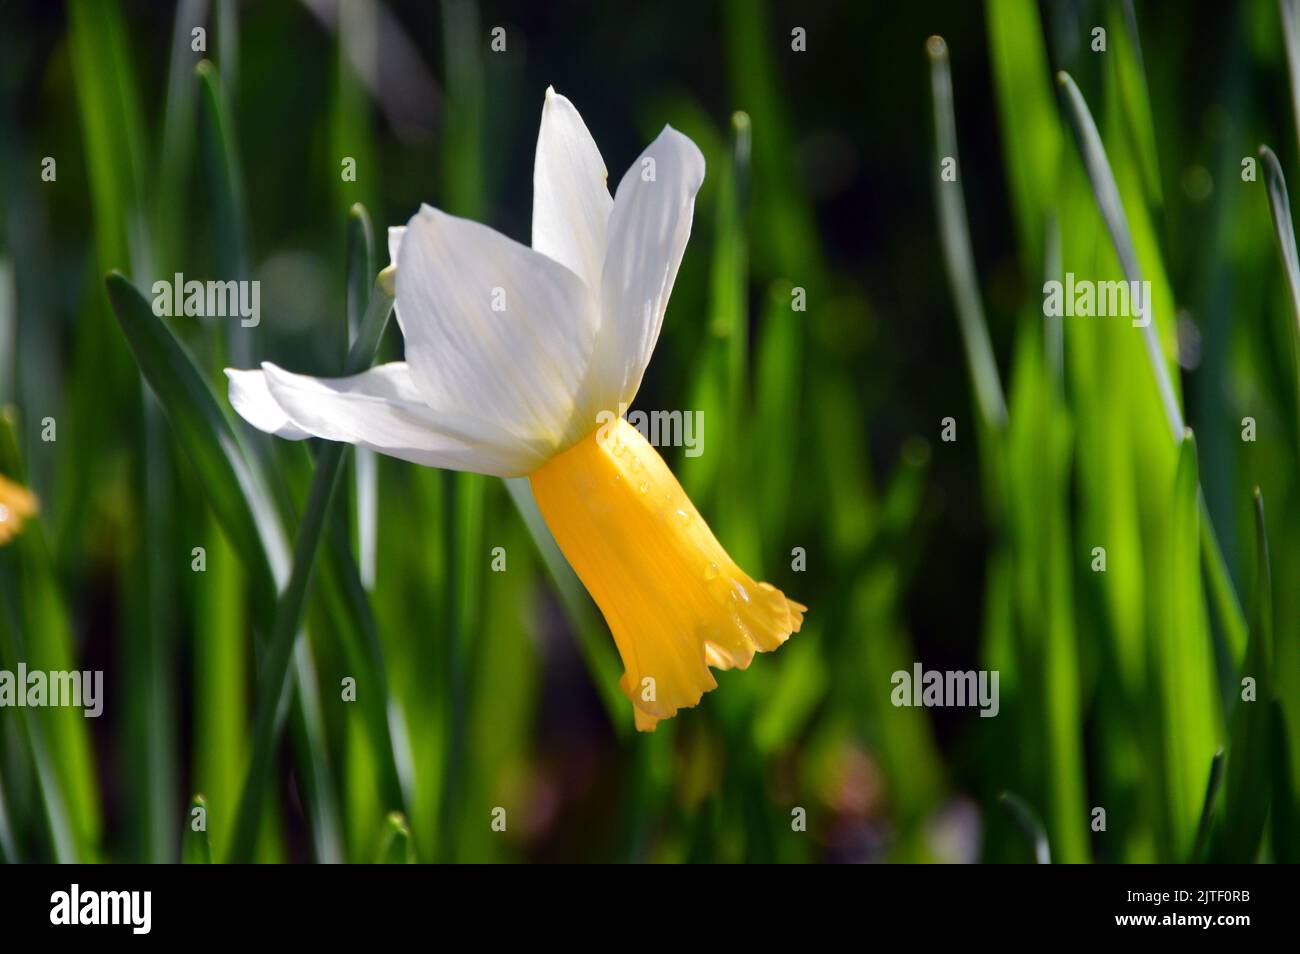 Single White/Yellow Narcissus, Cyclamineus Daffodil 'Winter Waltz' Flower at Sizergh Castle and Garden near Kendal, Lake District National Park. UK. Stock Photo